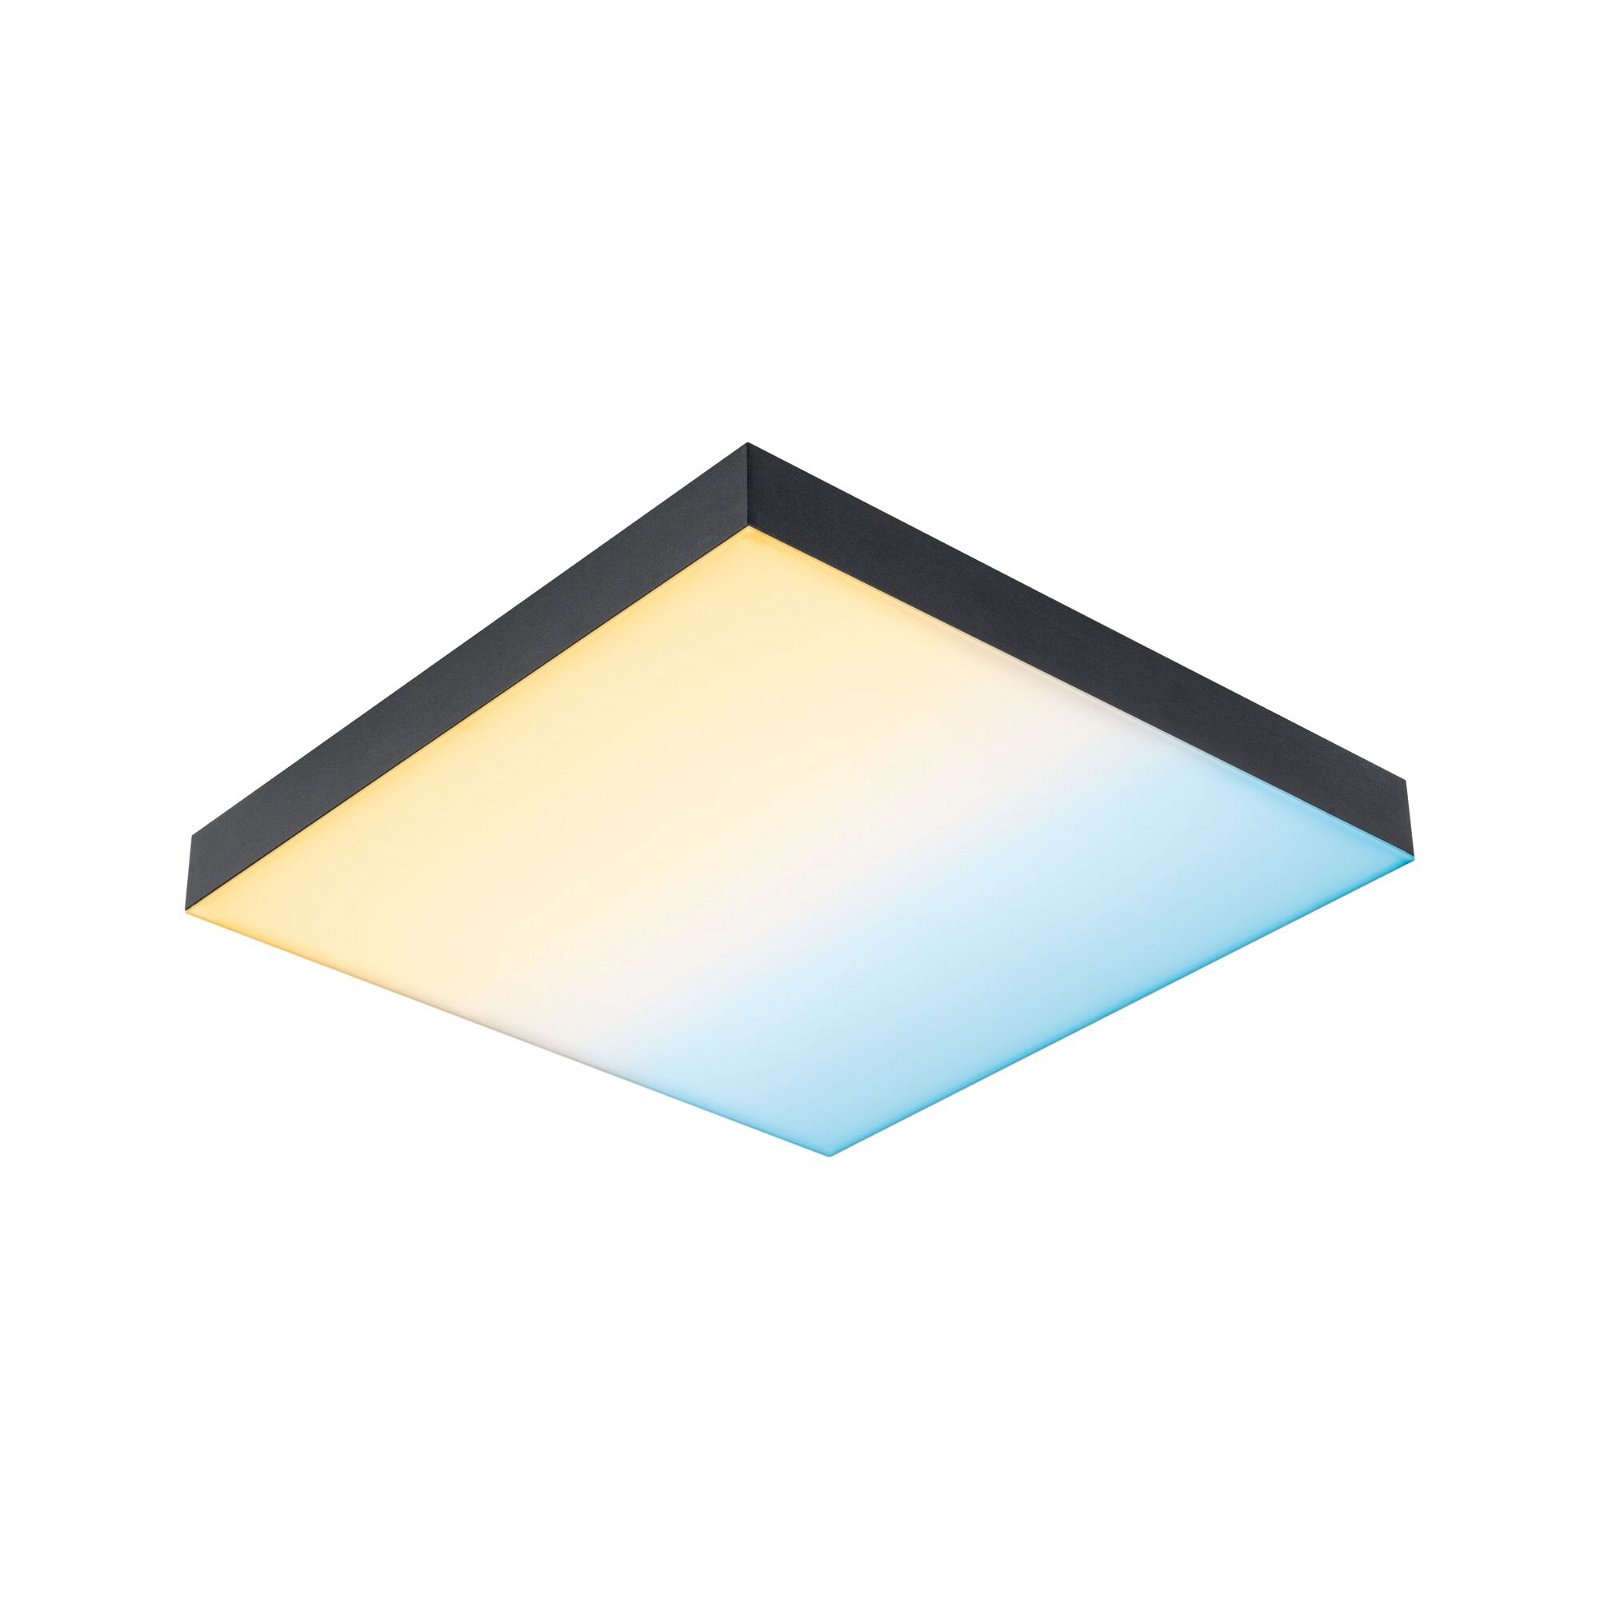 LED Panel Velora Rainbow dynamicRGBW square 295x295mm 13,2W 1140lm 3000 - 6500K Black dimmable